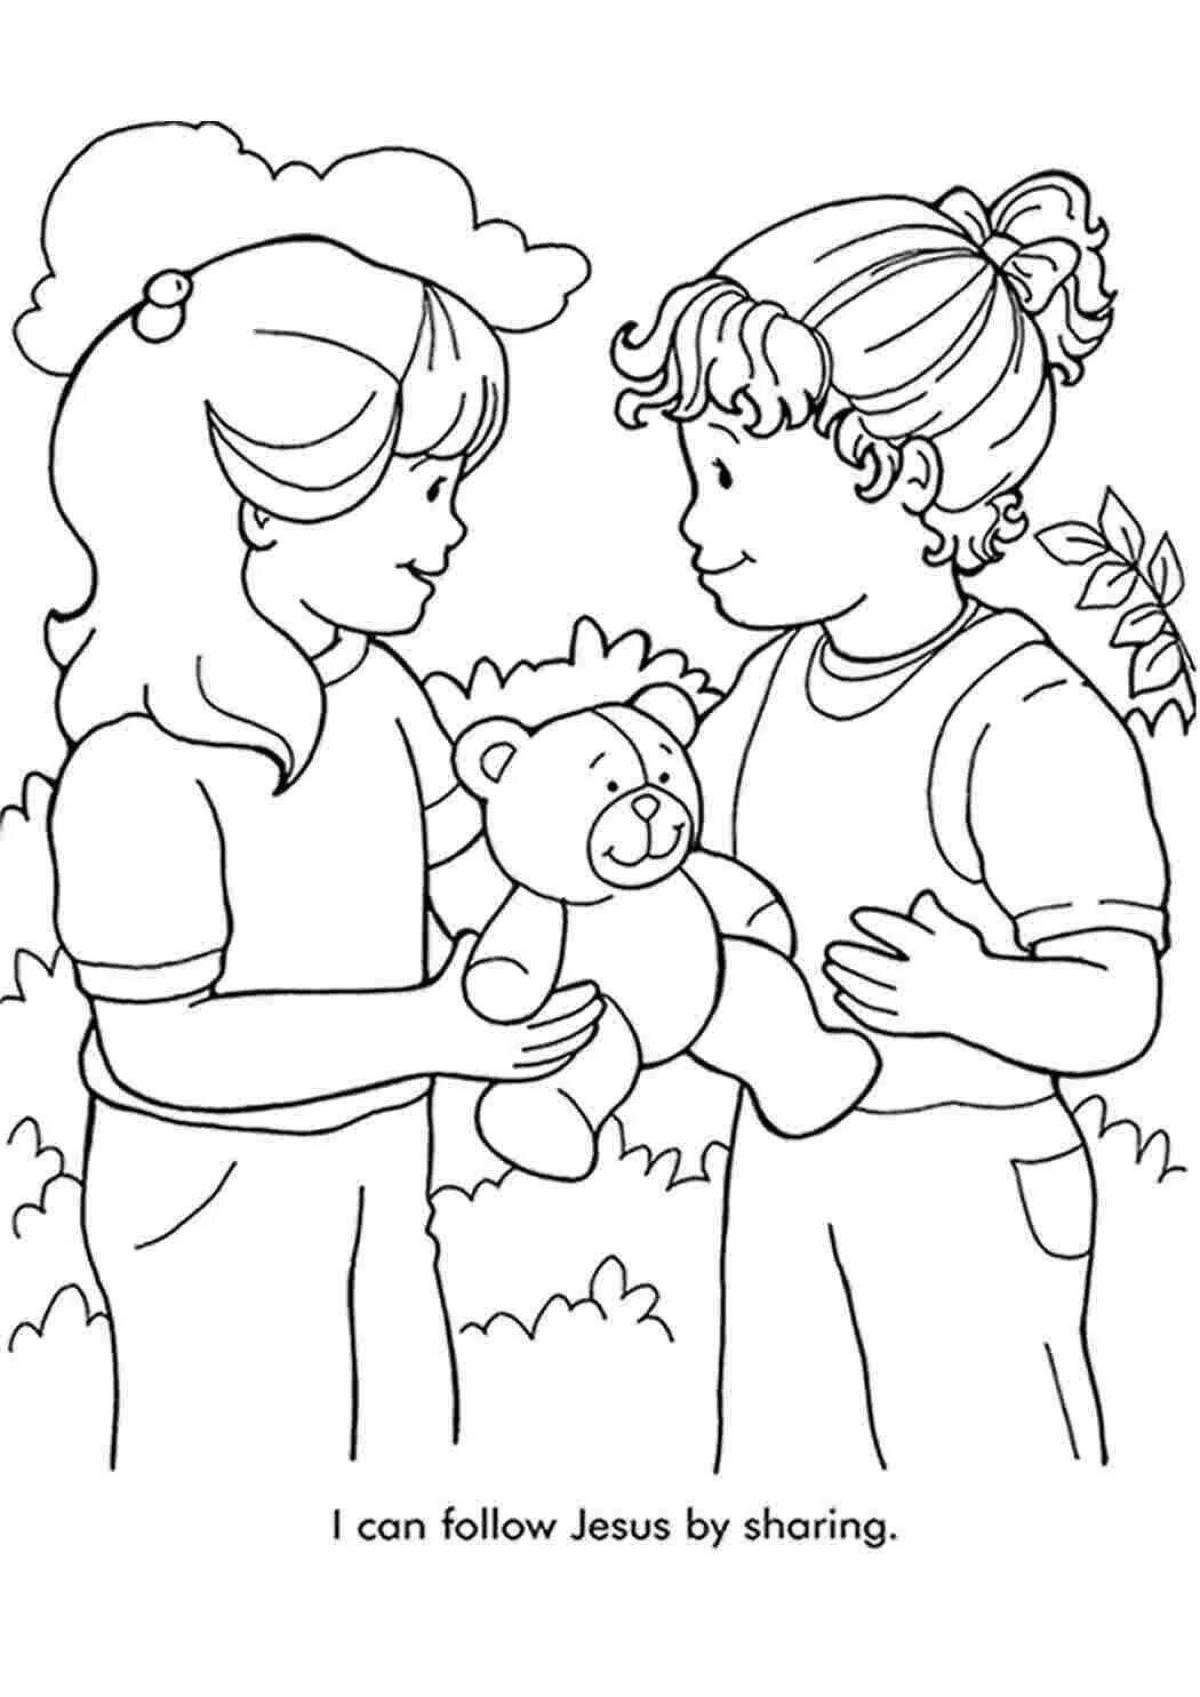 Colorful coloring page interaction